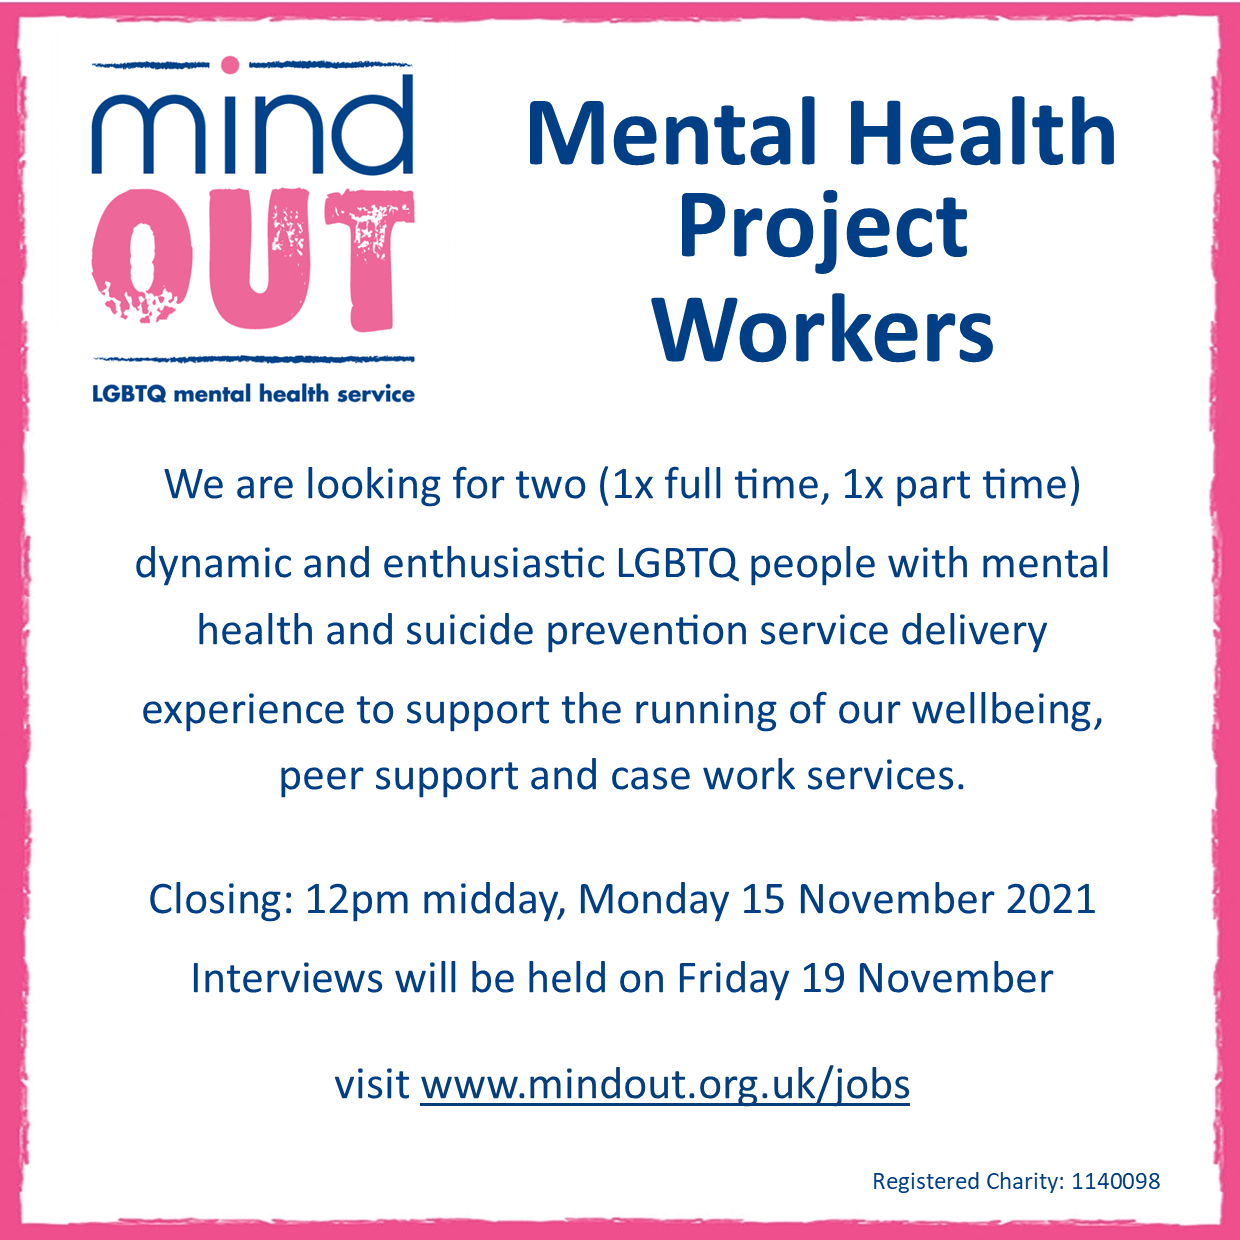 Image has a pink border, and features the MindOut logo. In blue writing it shows the job role, and includes details of the post including hours and salary, closing date and date for interviews. Bottom of the image includes the MindOut website and charity number